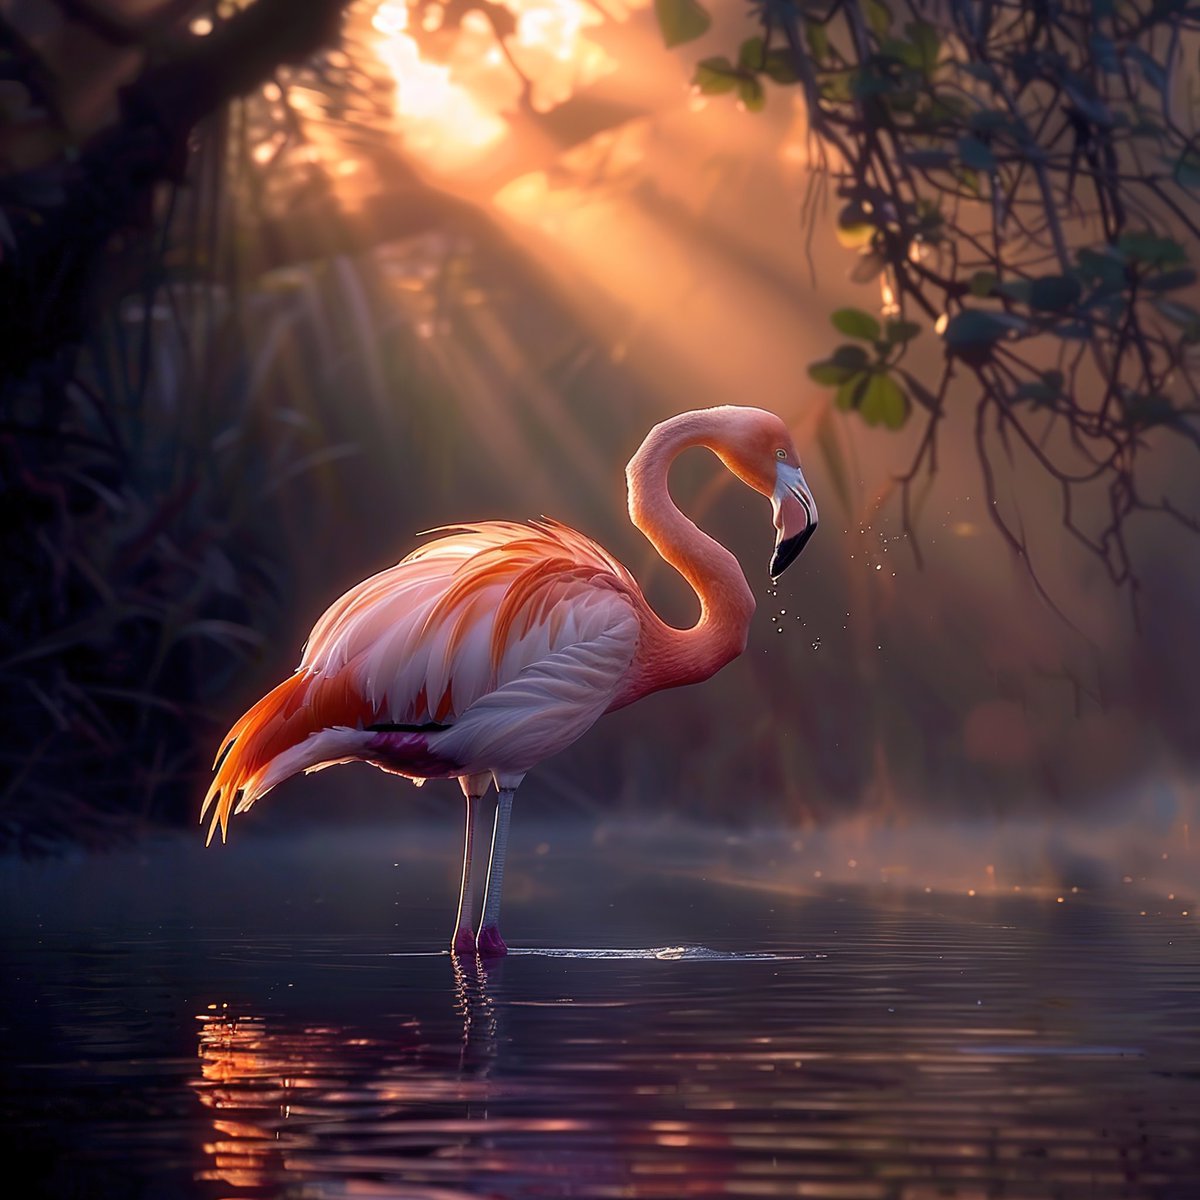 @HUAWEI_TECH4ALL The graceful posture of a flamingo by the water exudes harmony and tranquility throughout the entire scene. Whether in natural landscapes or embodied by living creatures, such beauty is worthy of our cherishment and protection.#Tech4Nature AI tools:midjourney author：DAHU